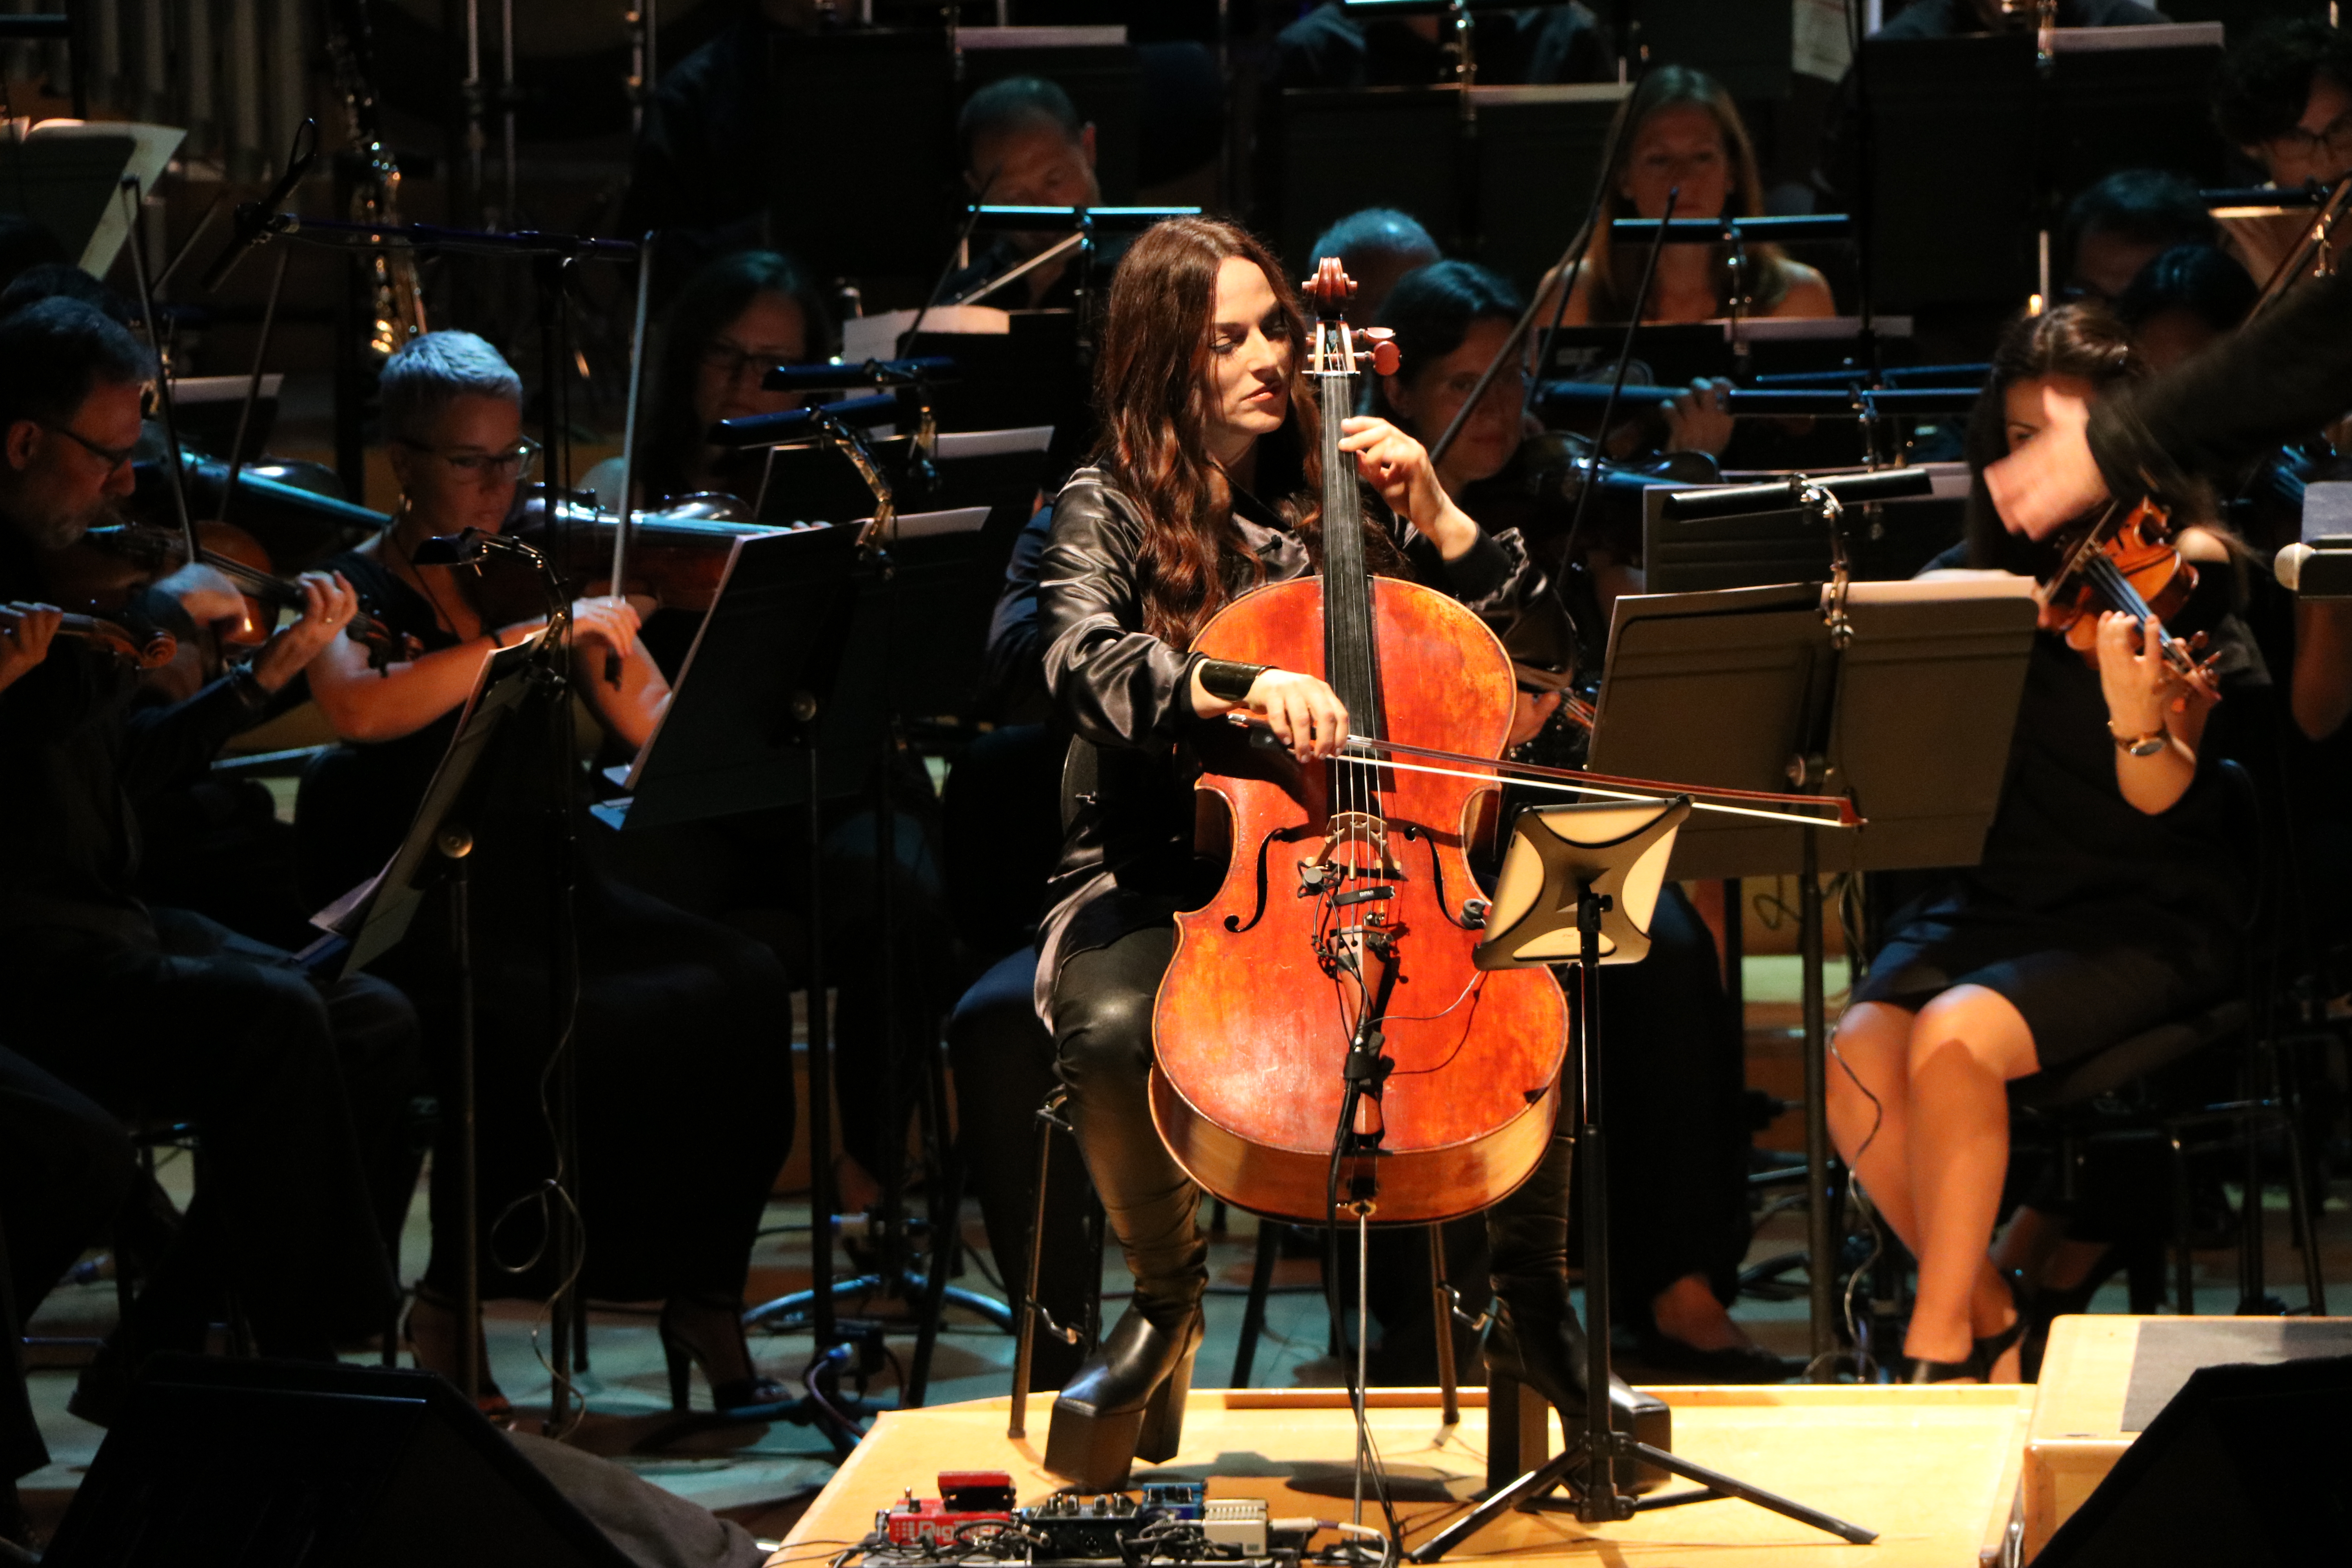 Maya Beiser joined the orchestra as the soloist cello